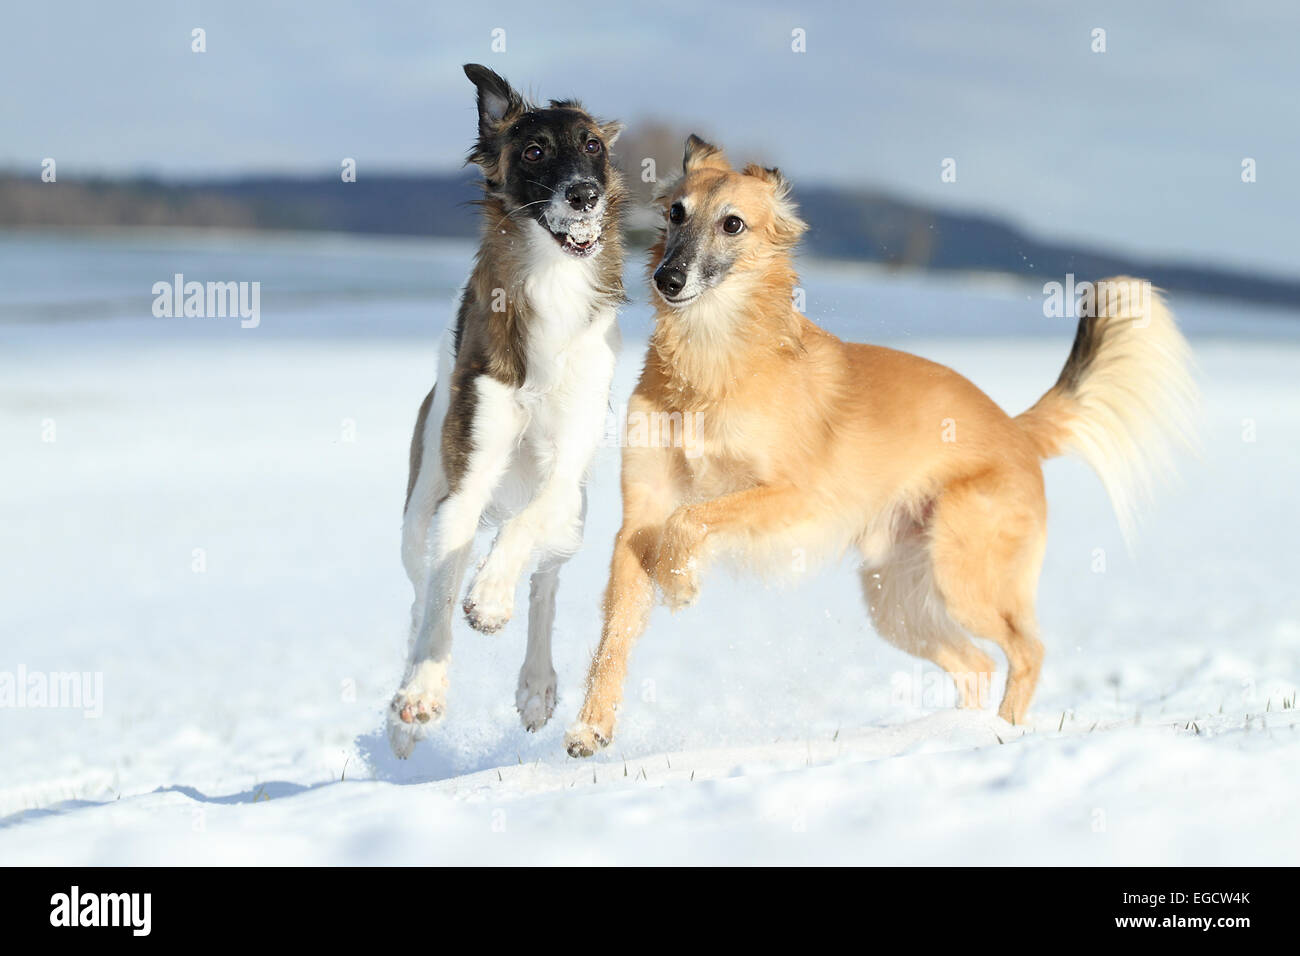 Silken Windsprite, whippets, dogs playing in the snow, Rhineland-Palatinate, Germany Stock Photo